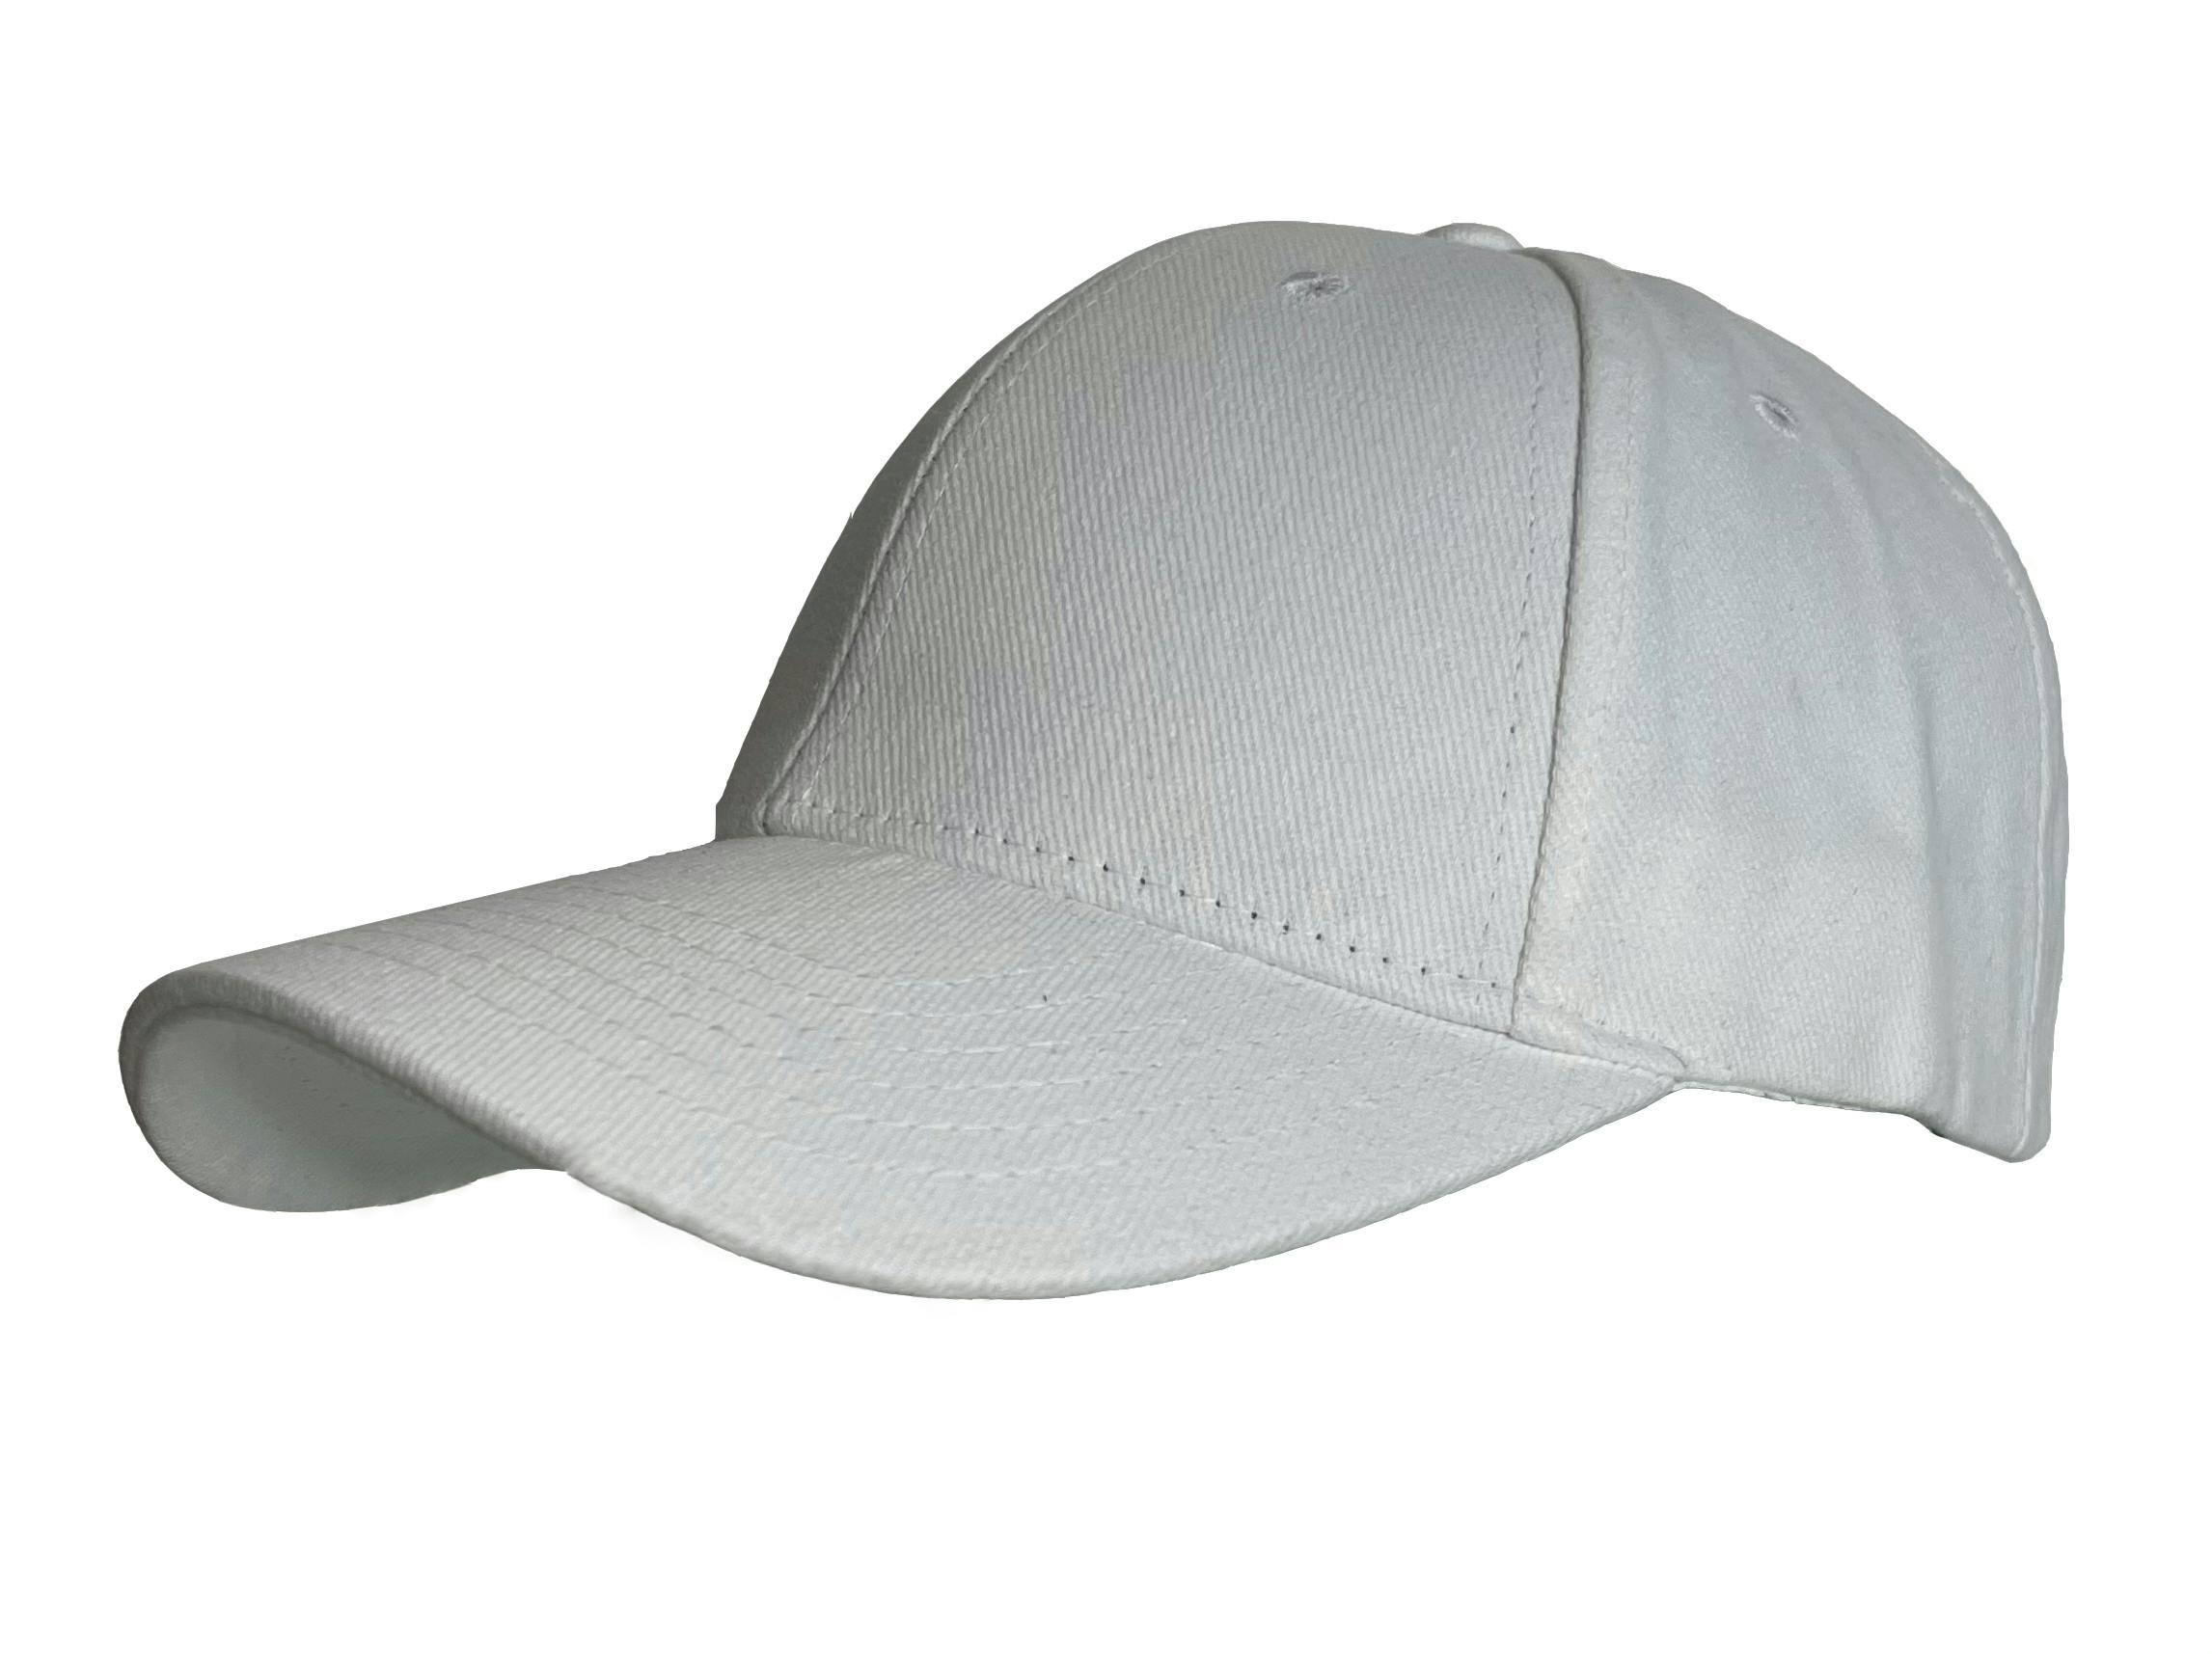 6 PANEL HEAVY BRUSHED COTTON CAP WITH VELCRO CLOSURE